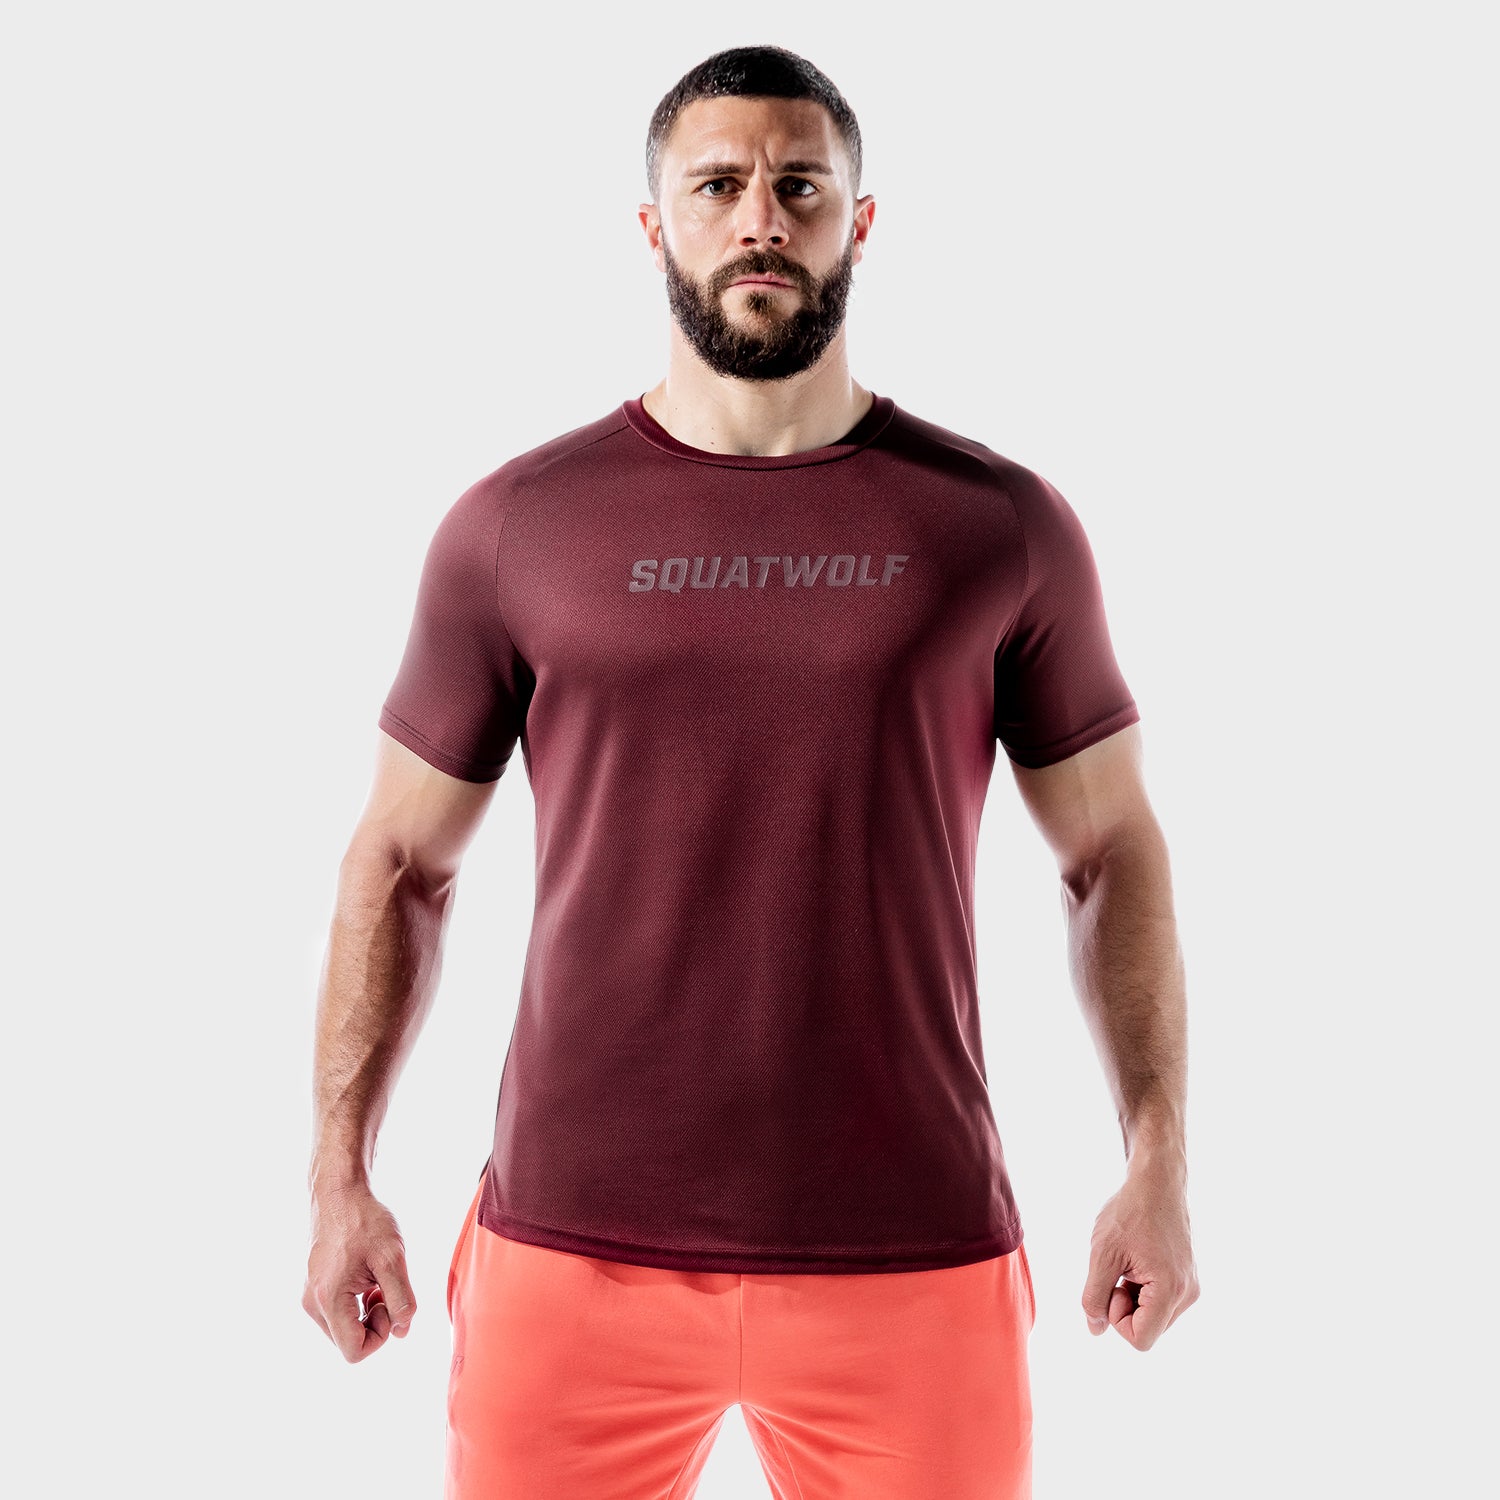 squatwolf-workout-shirts-for-men-lab-360-recycled-mesh-tee-tawny-port-gym-wear